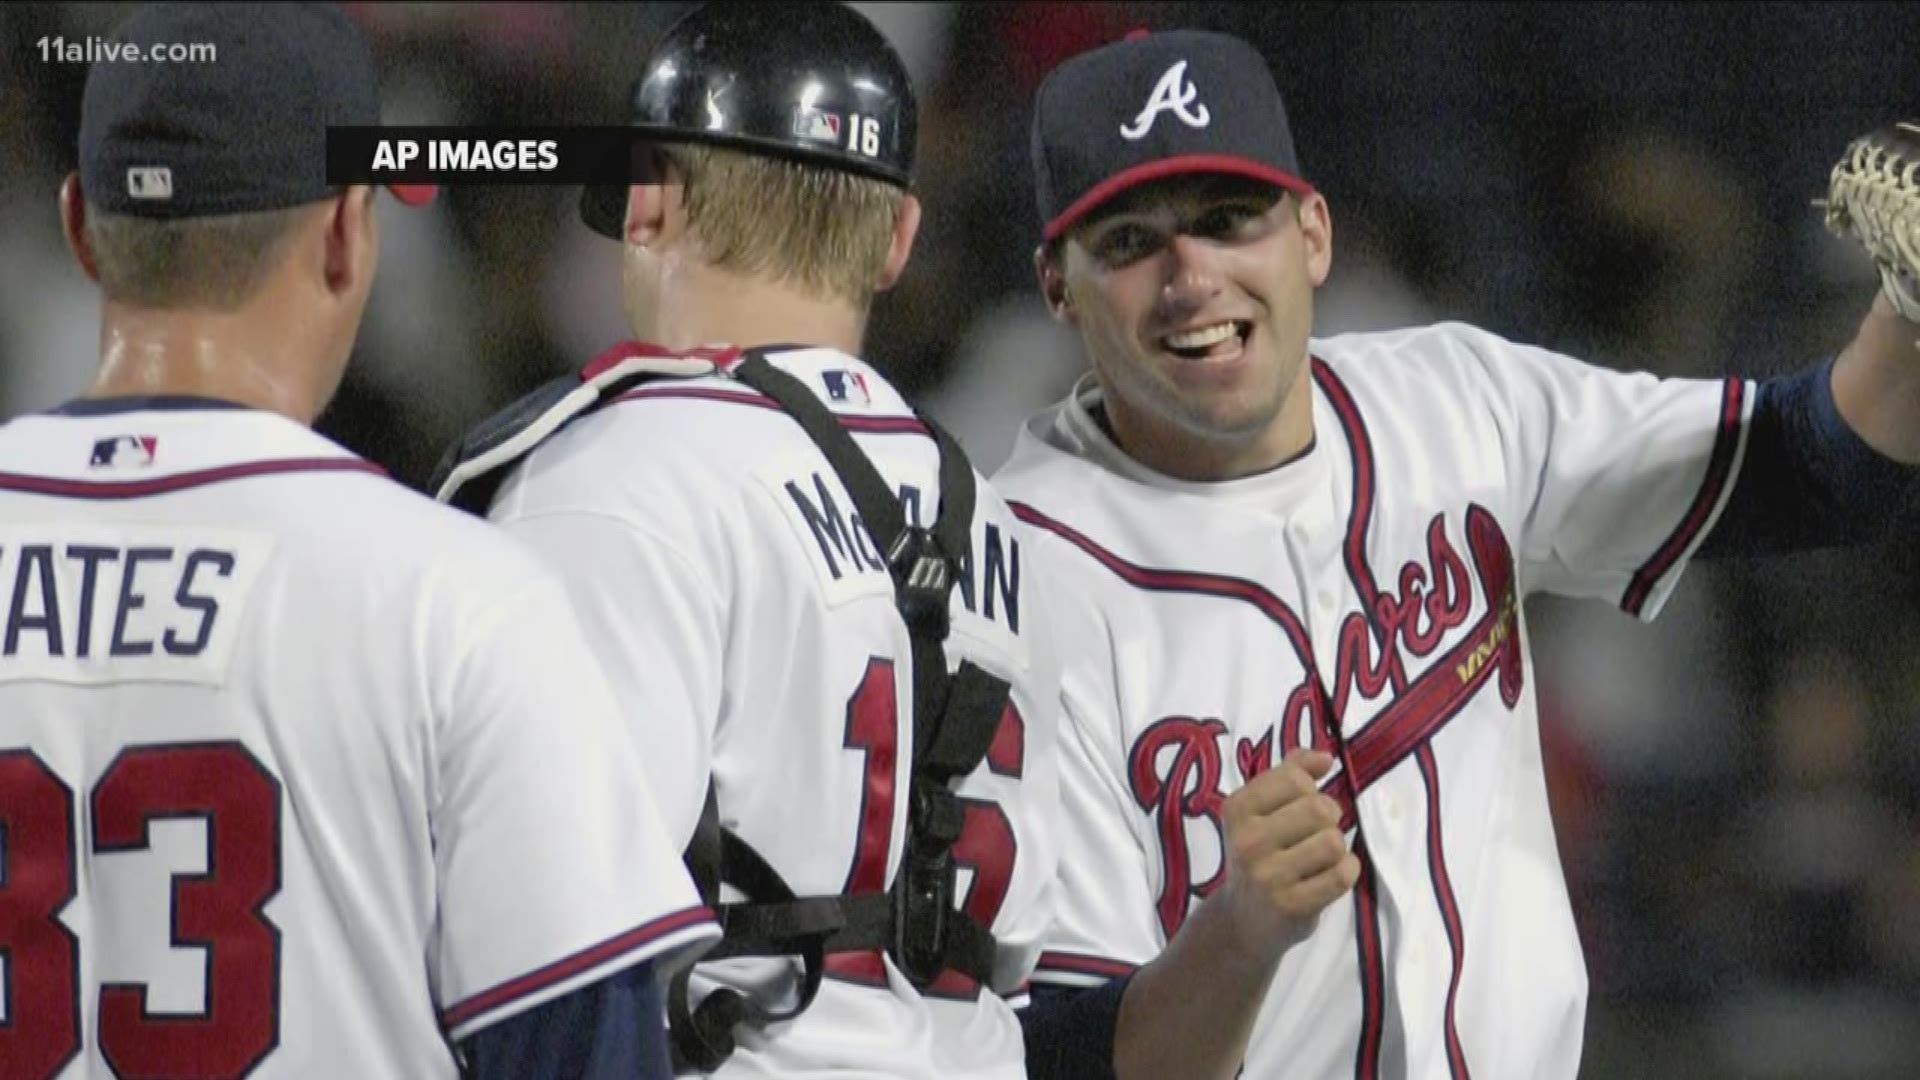 Jeff Francoeur turns the page as FOX Sports South Braves broadcaster, News